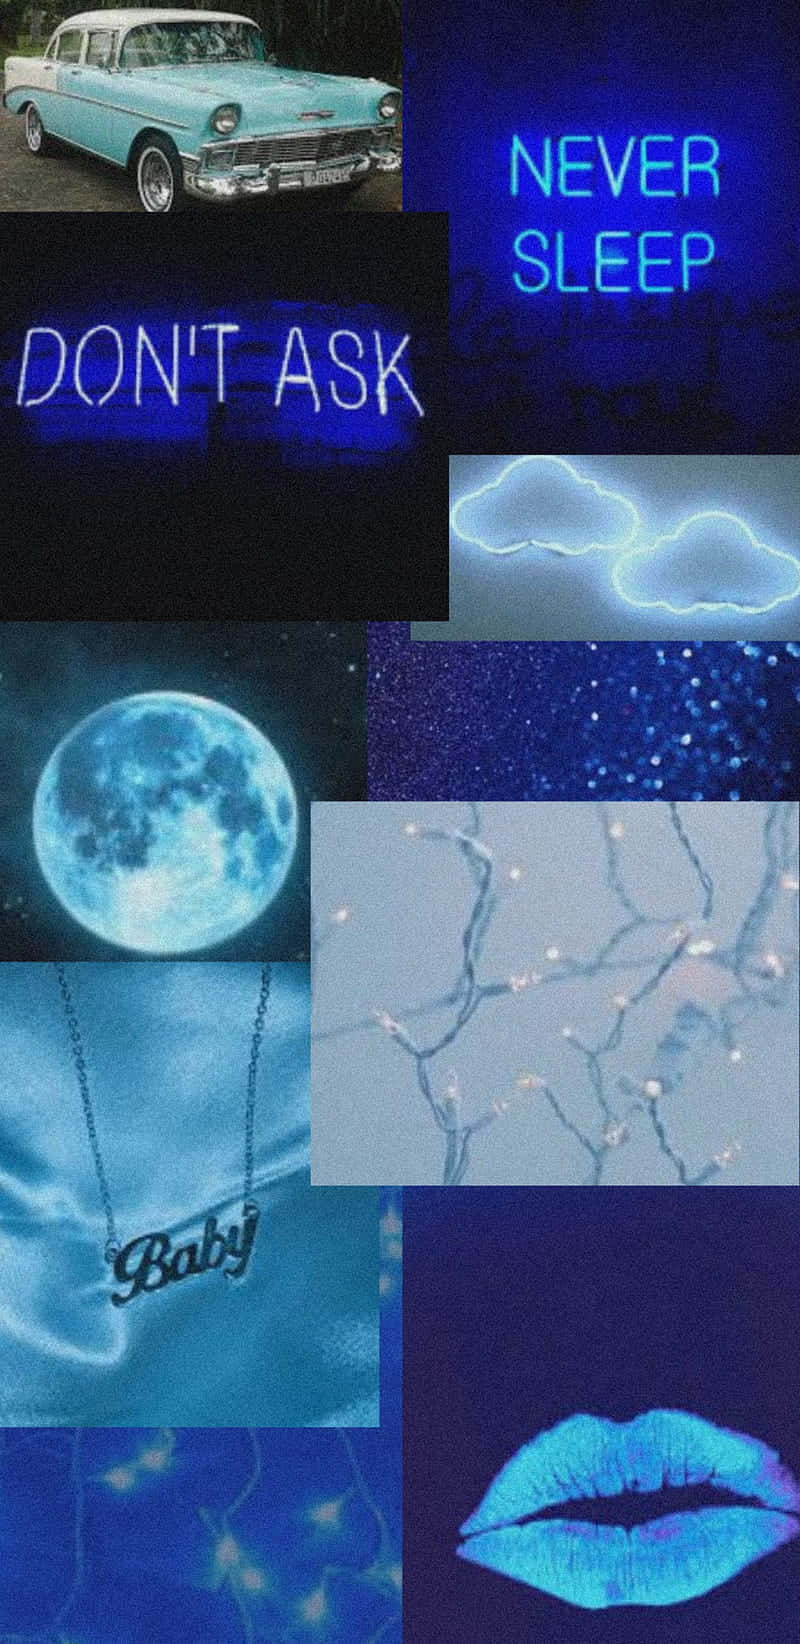 Blue Aesthetic Neon Collage Wallpaper